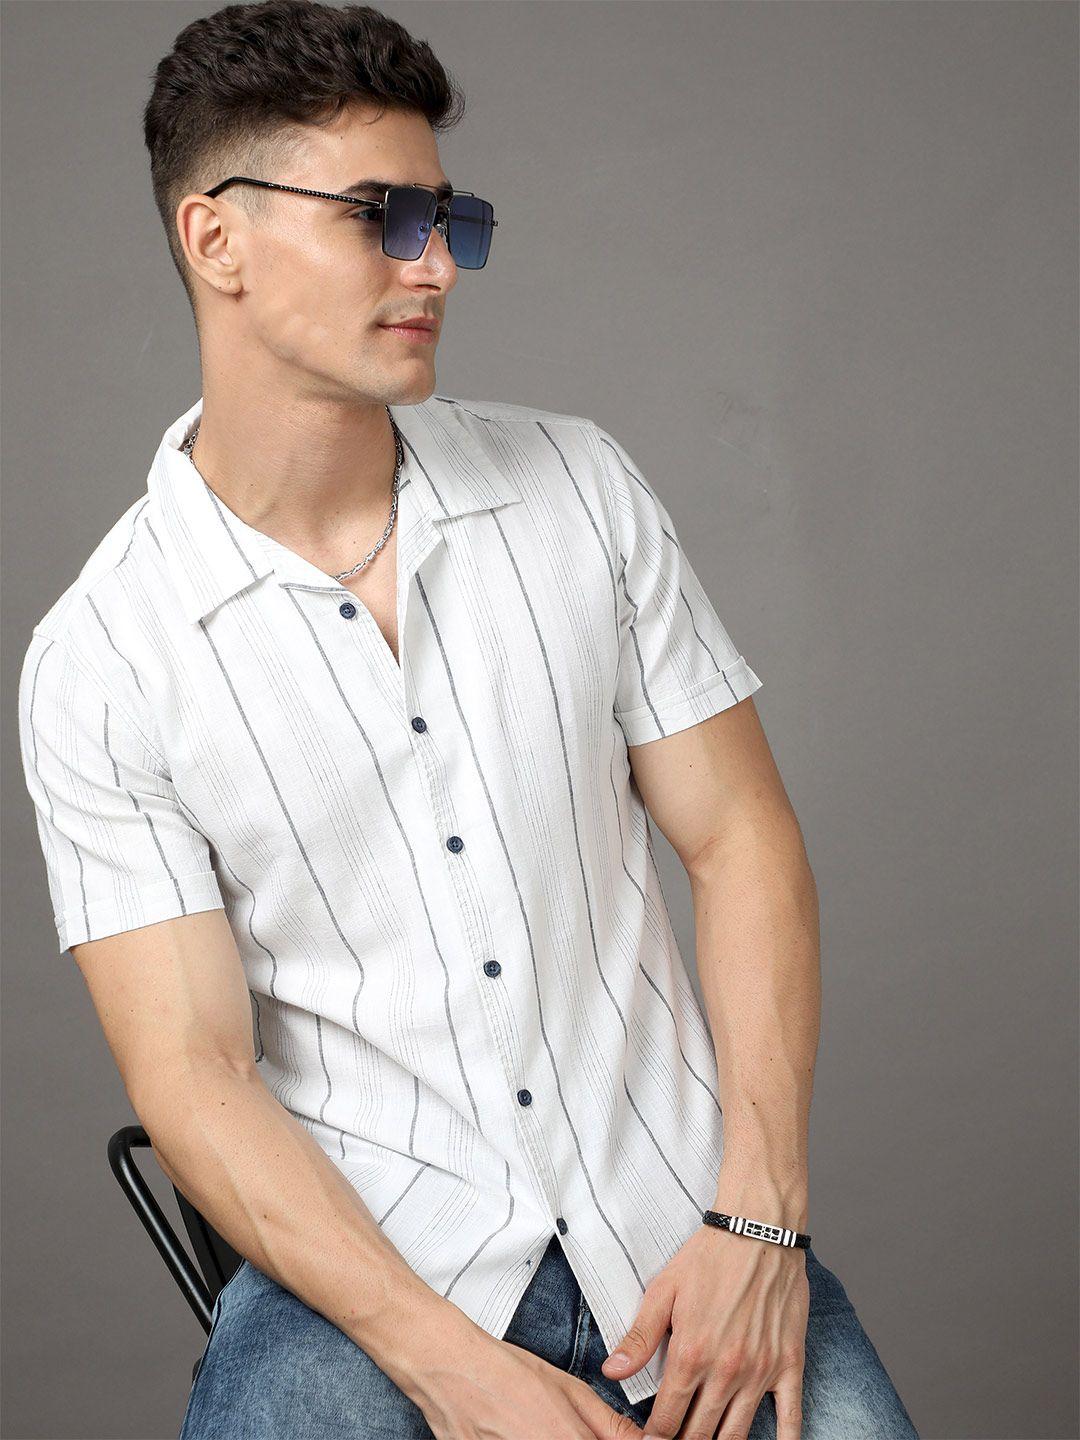 here&now off white vertical striped cuban collar cotton slim fit casual shirt